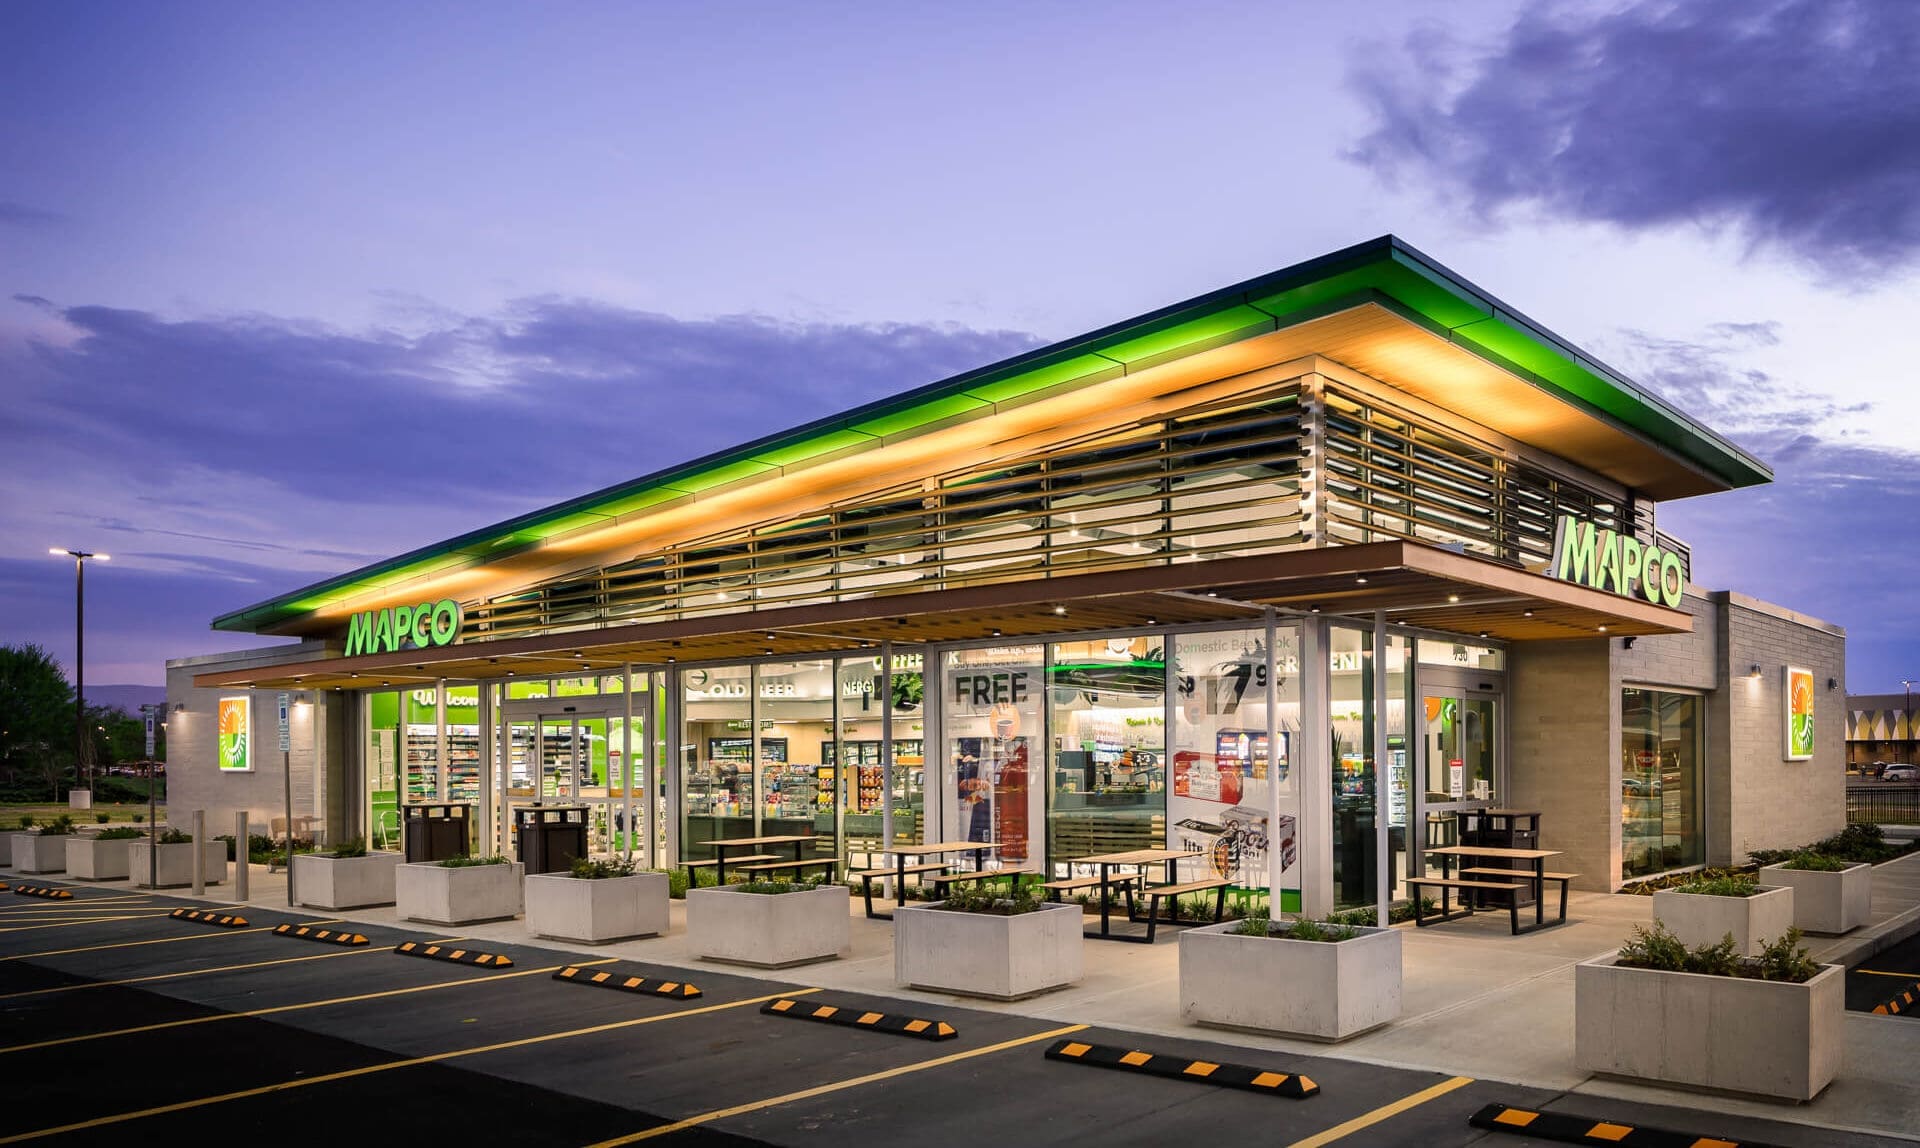 MAPCO Gas Stations - Commercial Photography - Nashville, TN